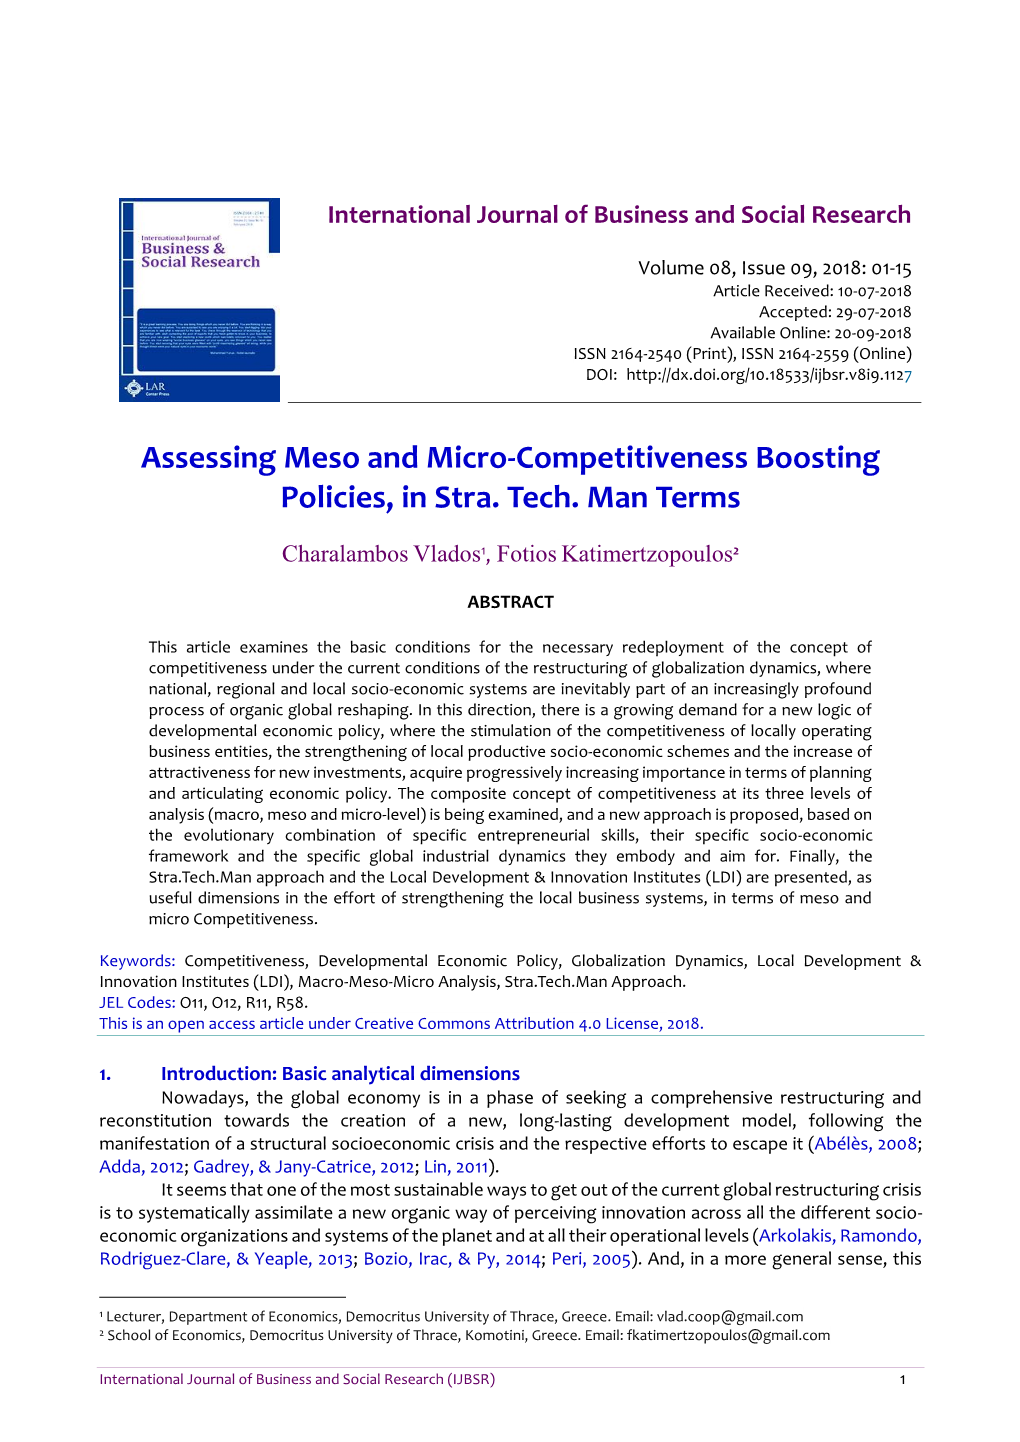 Assessing Meso and Micro-Competitiveness Boosting Policies, in Stra